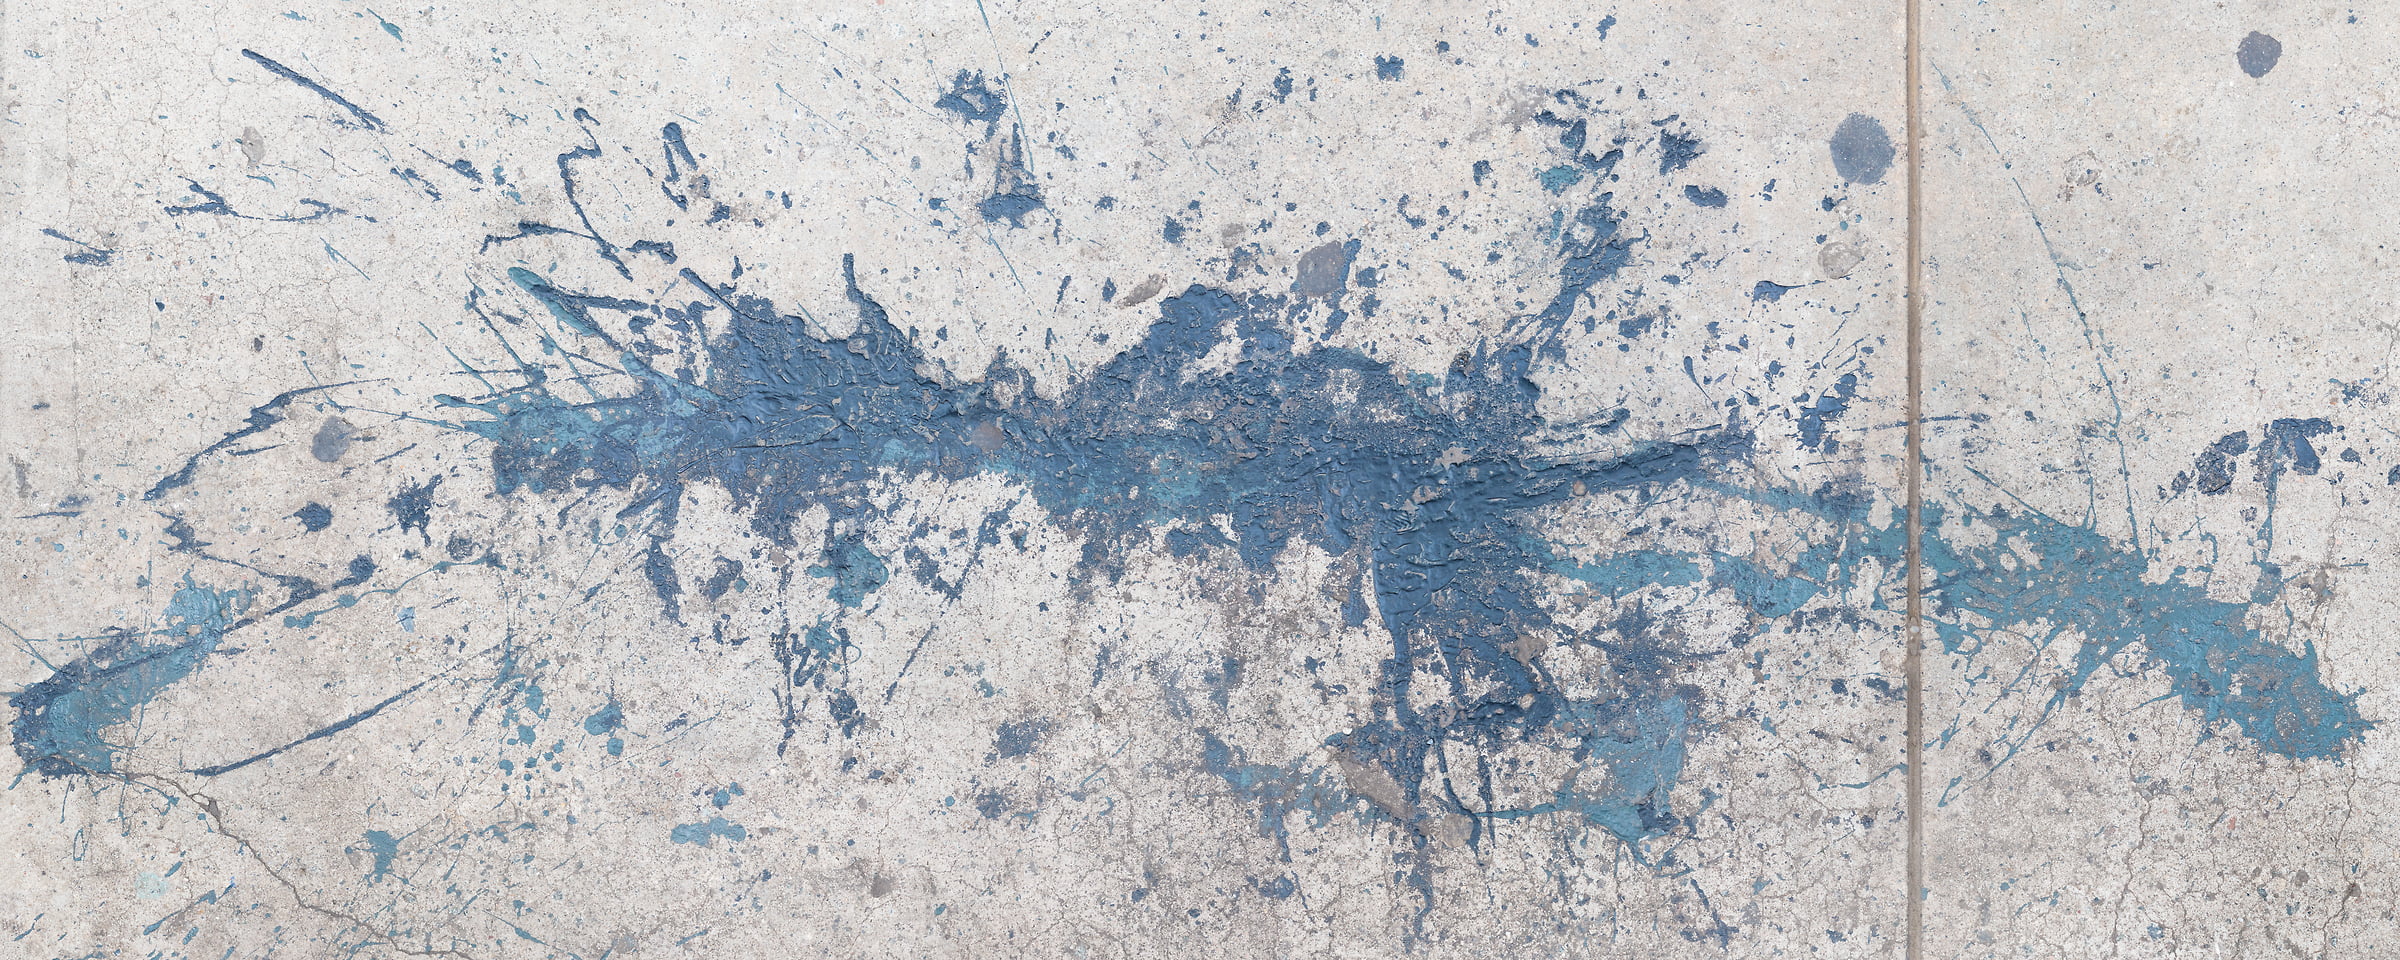 301 megapixels! A very high resolution, large-format VAST photo print of paint splattered on the New York City sidewalk that looks like a Jackson Pollock painting; fine art photograph created by Dan Piech in Manhattan, New York City.